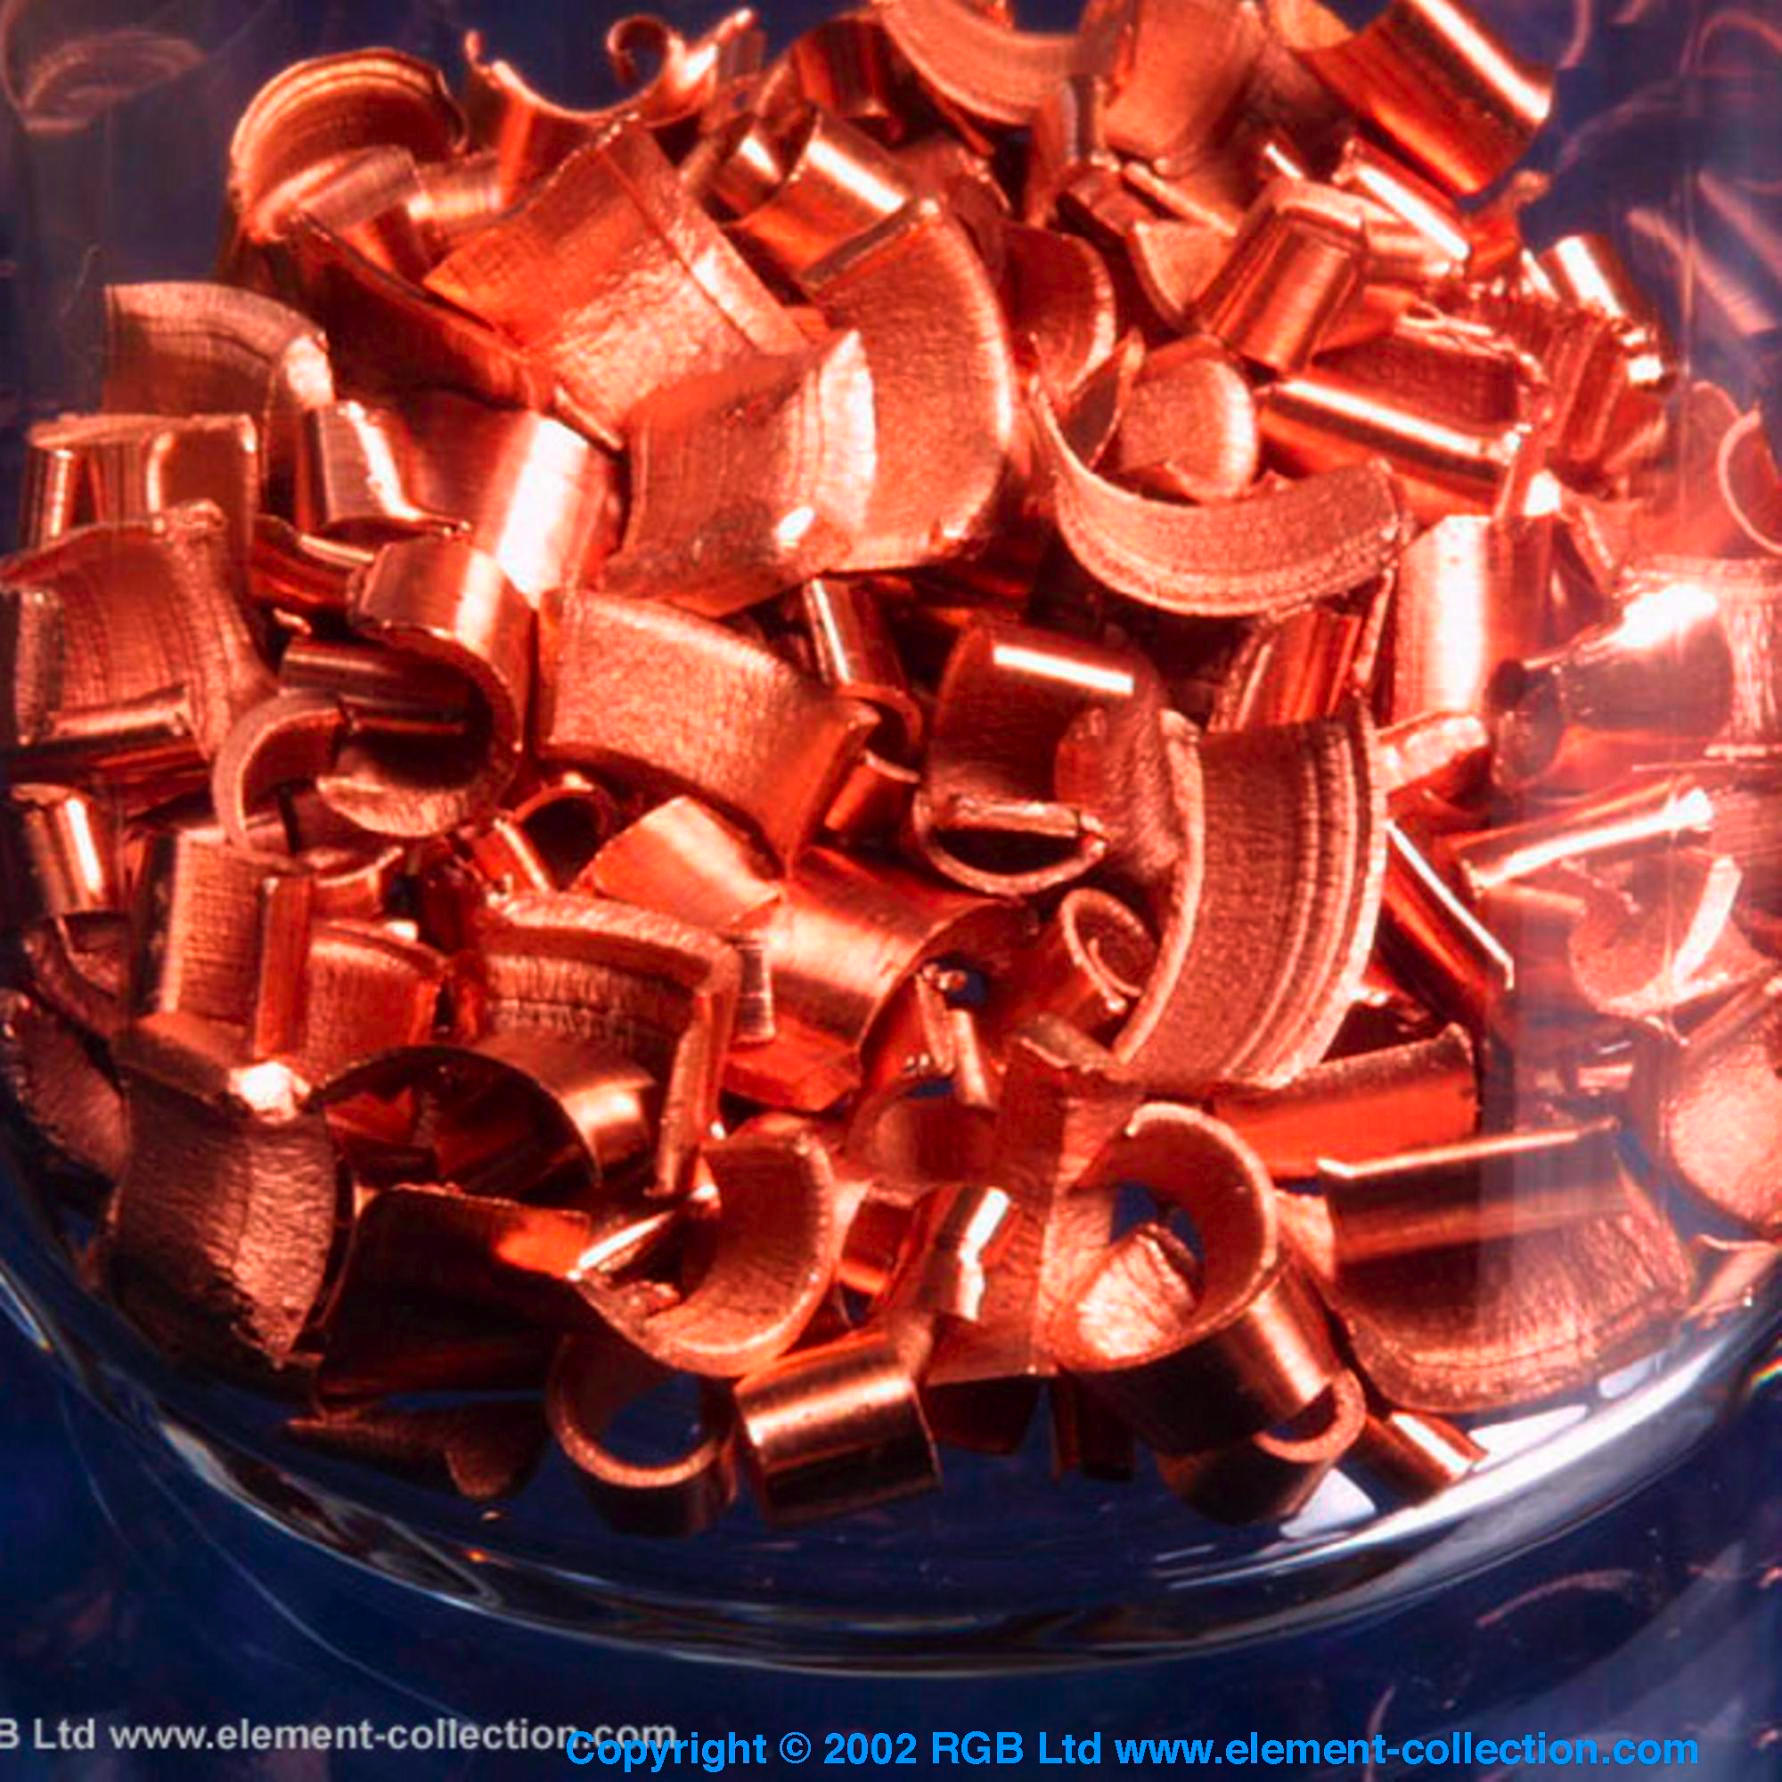 Copper Sample from the RGB Set